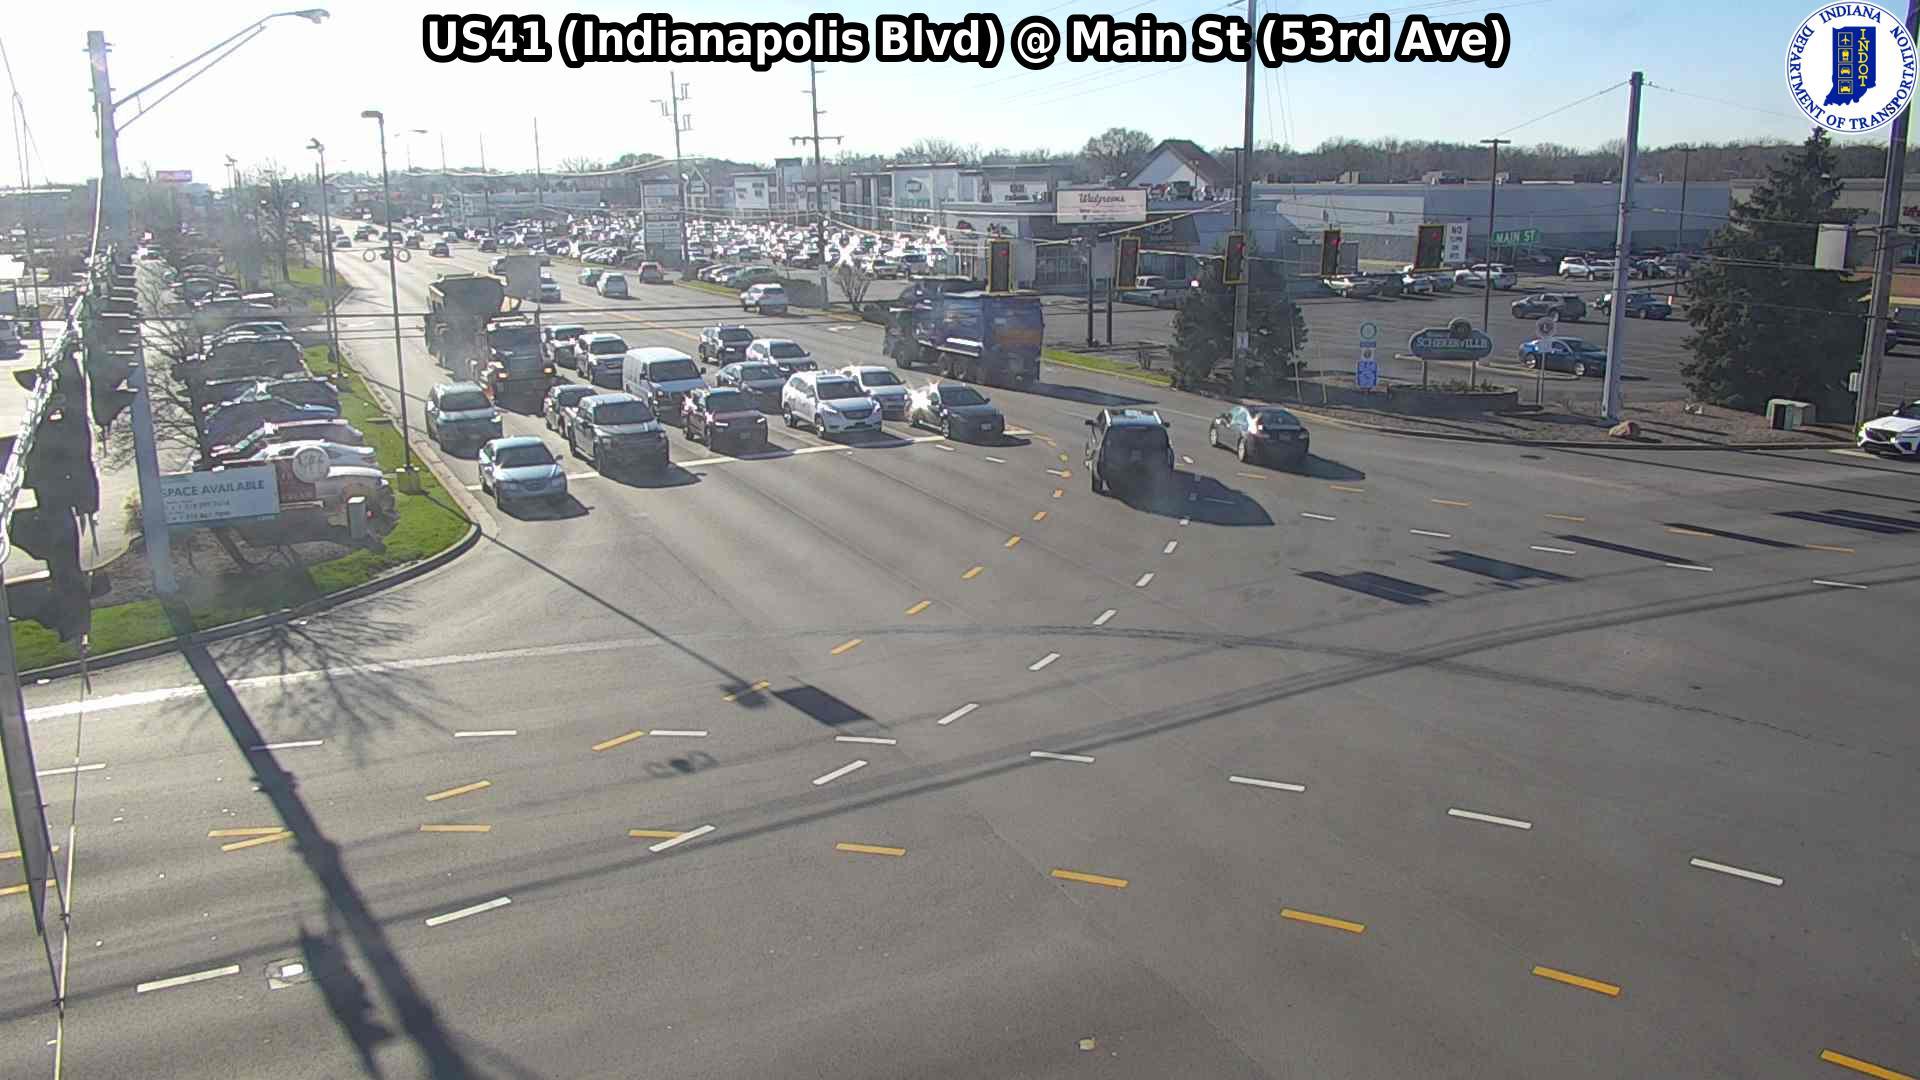 Traffic Cam Schererville: SIGNAL: US41 (Indianapolis Blvd) @ Main St (53rd Ave